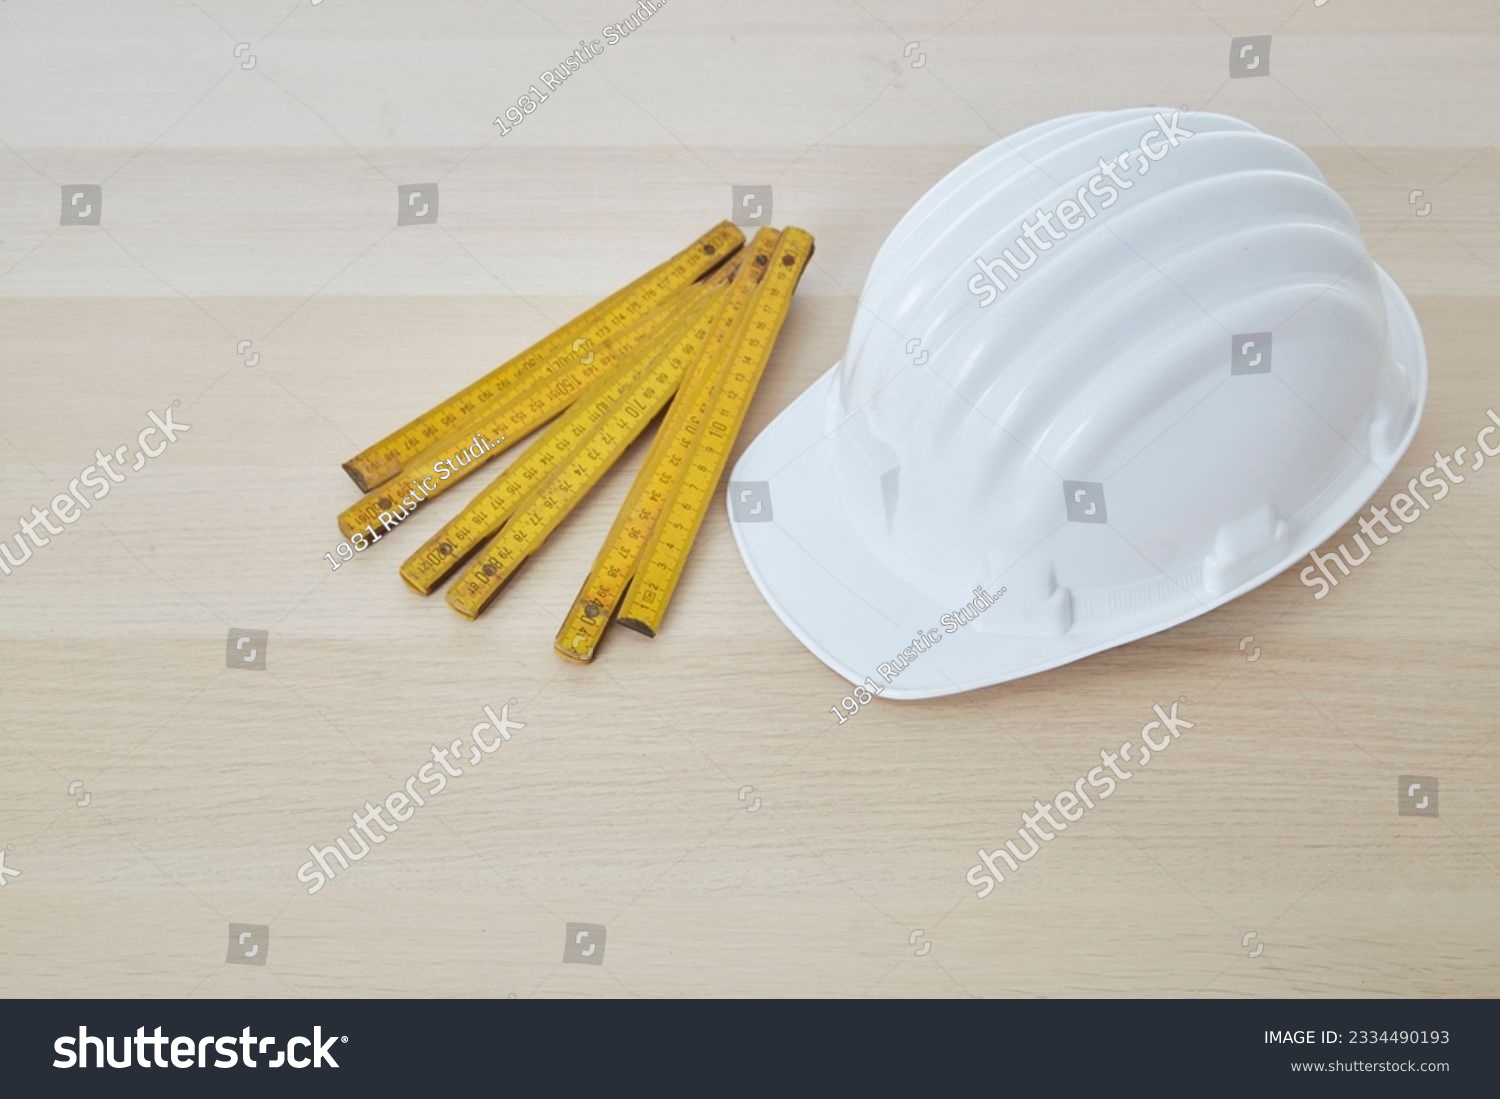 Construction tools and a white hard hat with a measuring stick, paper house building plan on a wooden work table copy space for text #2334490193